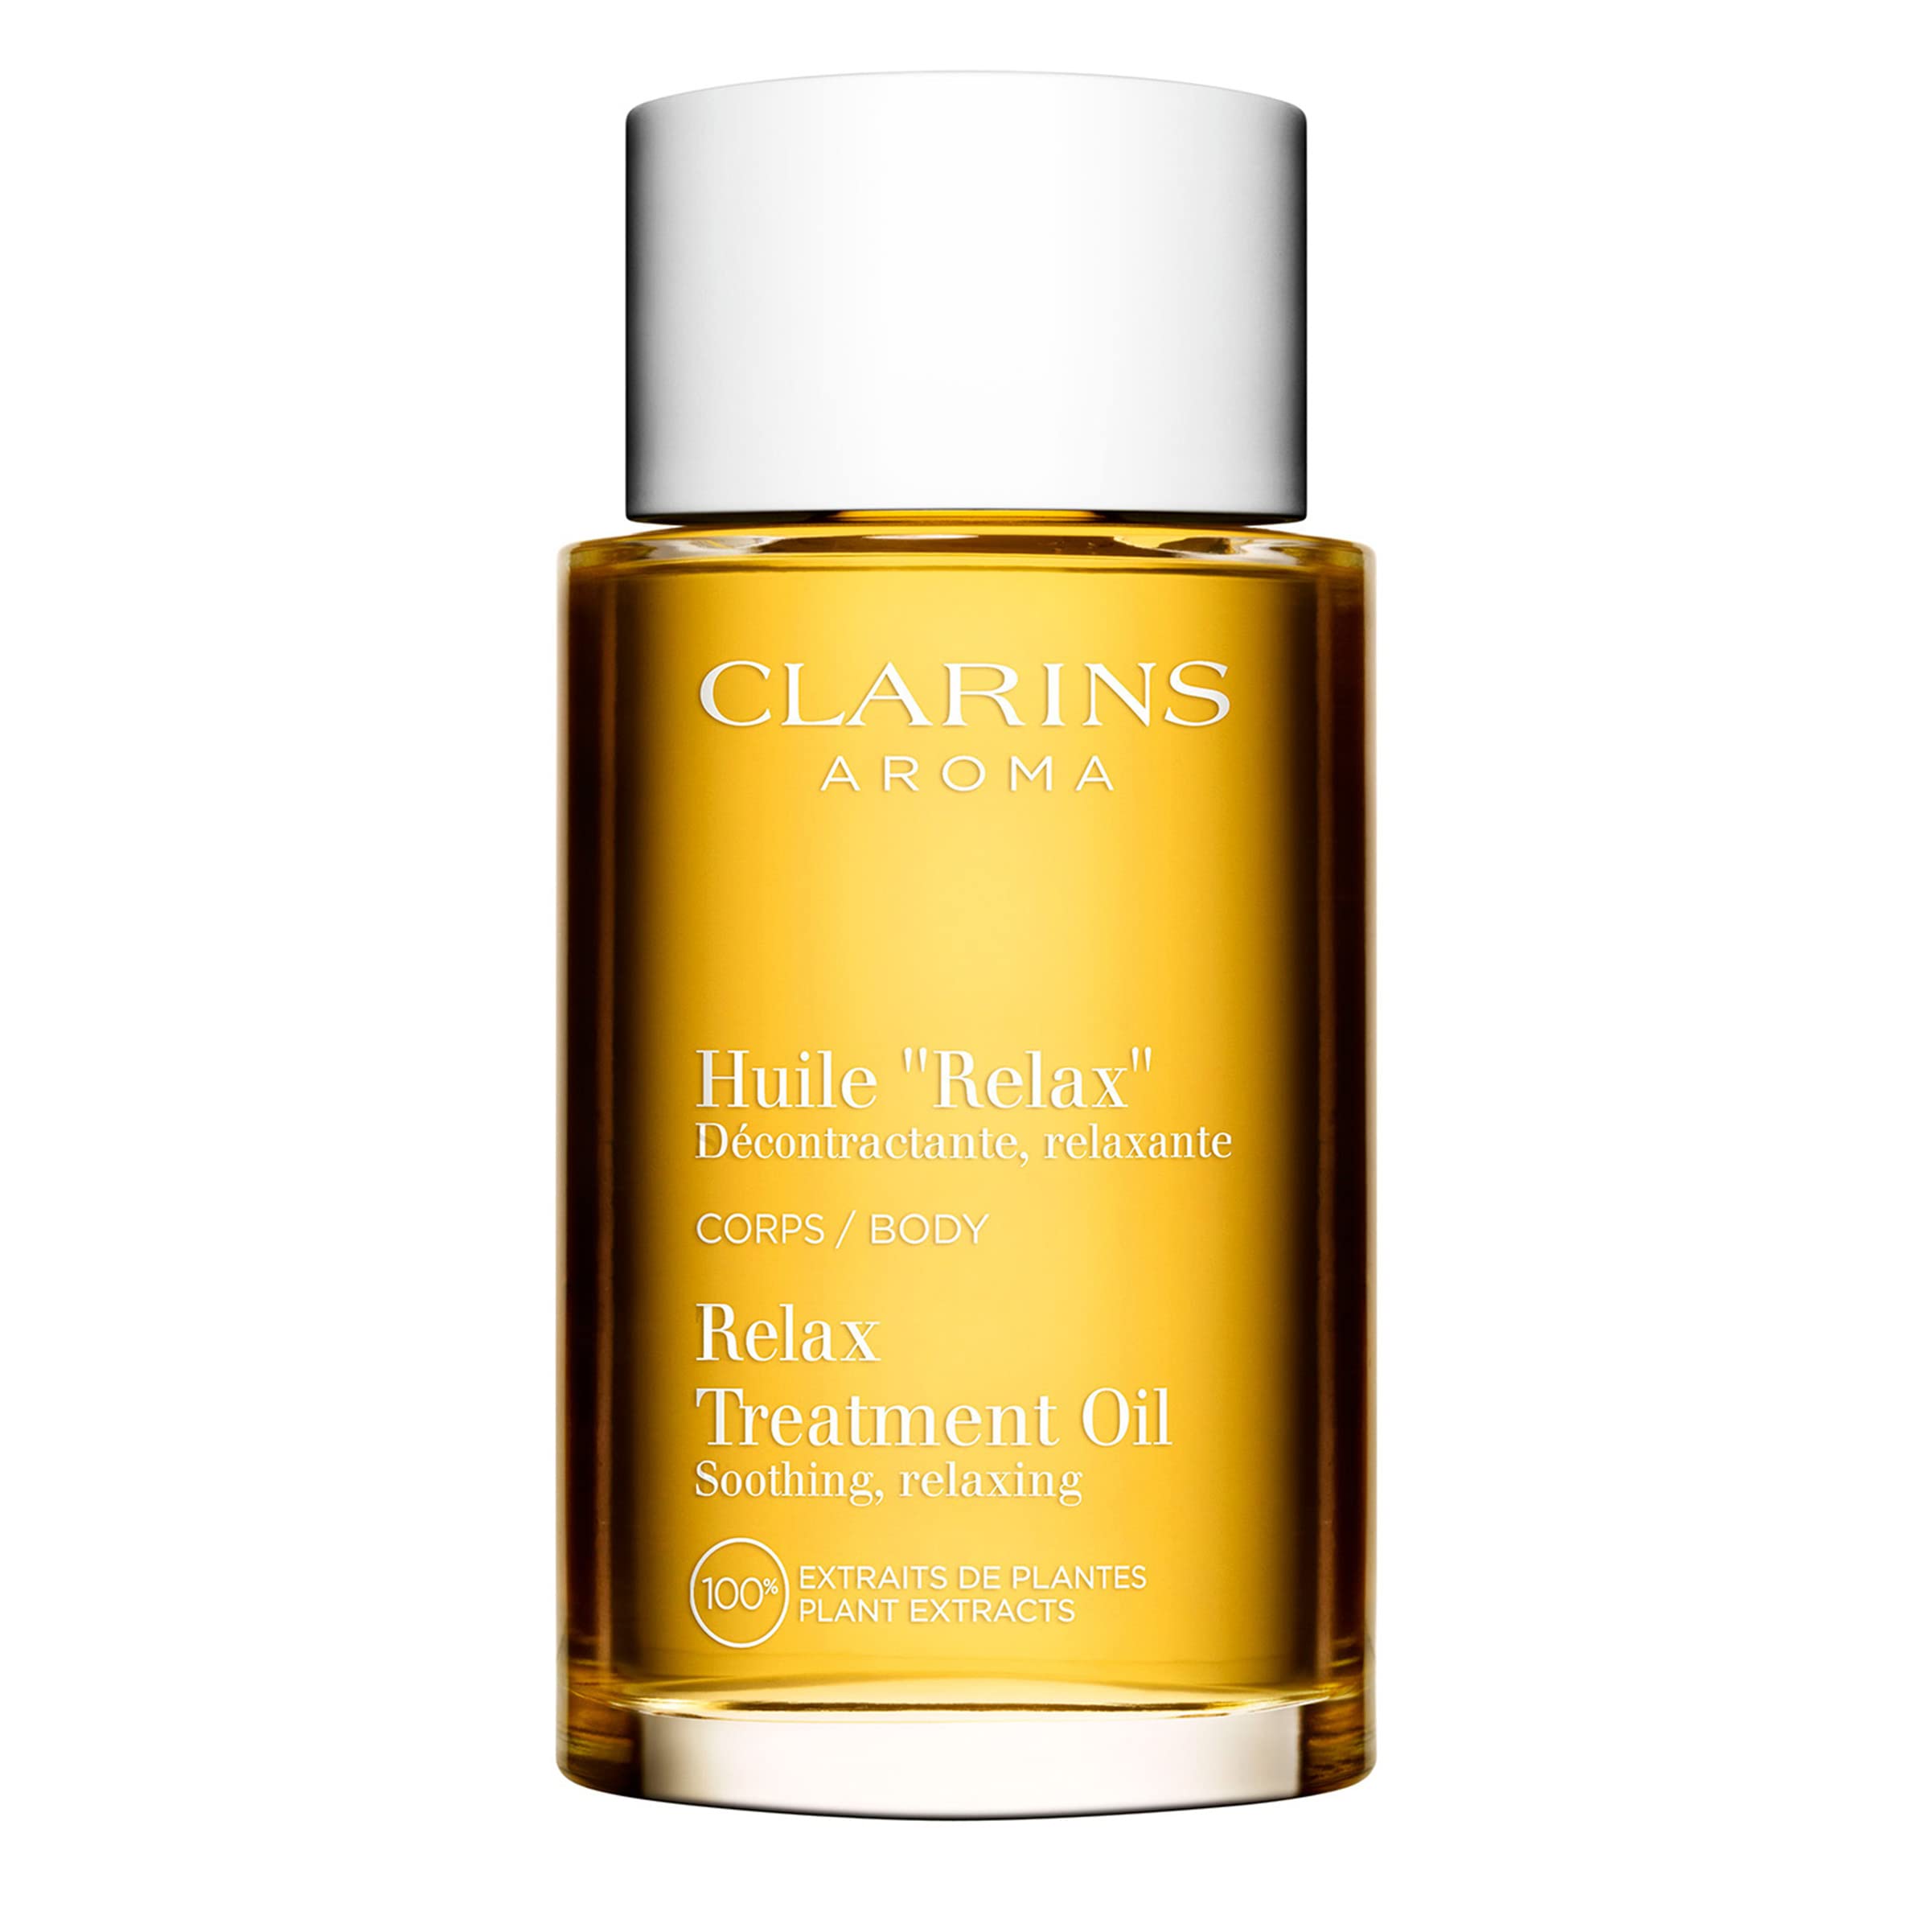 Clarins Relax Body Treatment Oil | Relaxes, Moisturizes and Soothes Aching Muscles | Relieves Stress and Fatigue | Nourished & Comfortable Skin After The First Use* | Natural 100% Plant Extracts